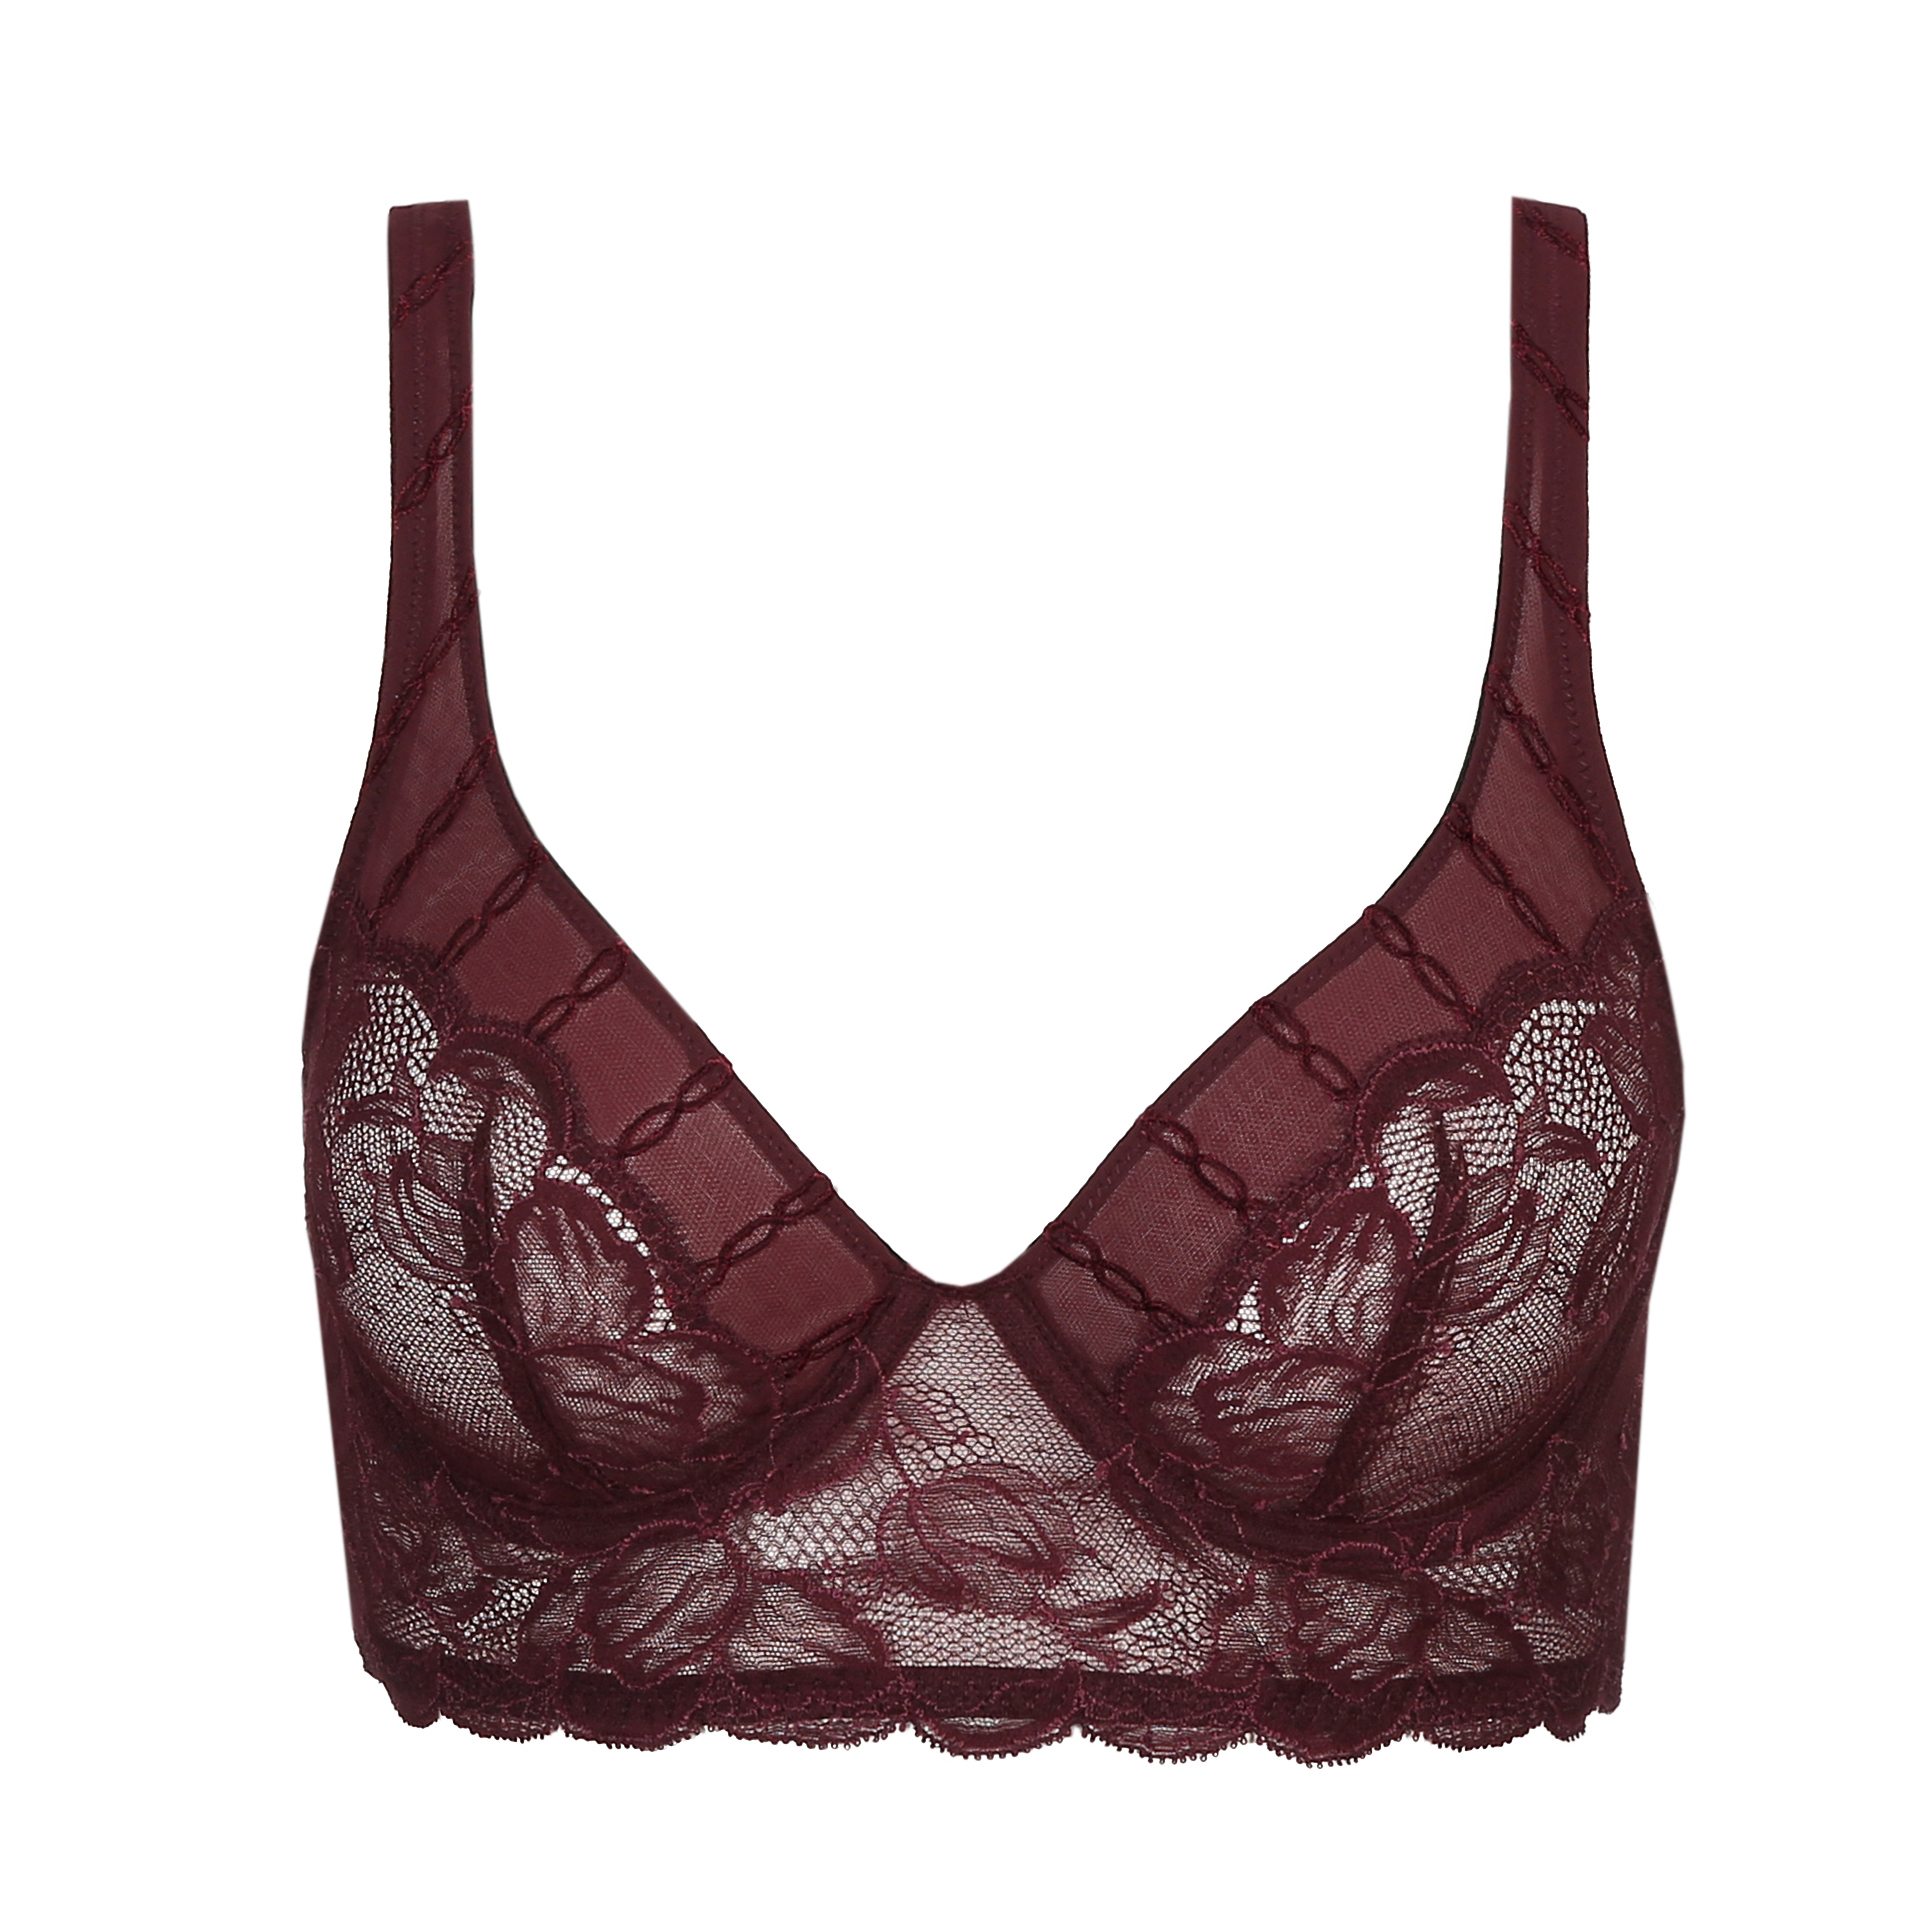 WINE GIRL is our most loved full Supported bra